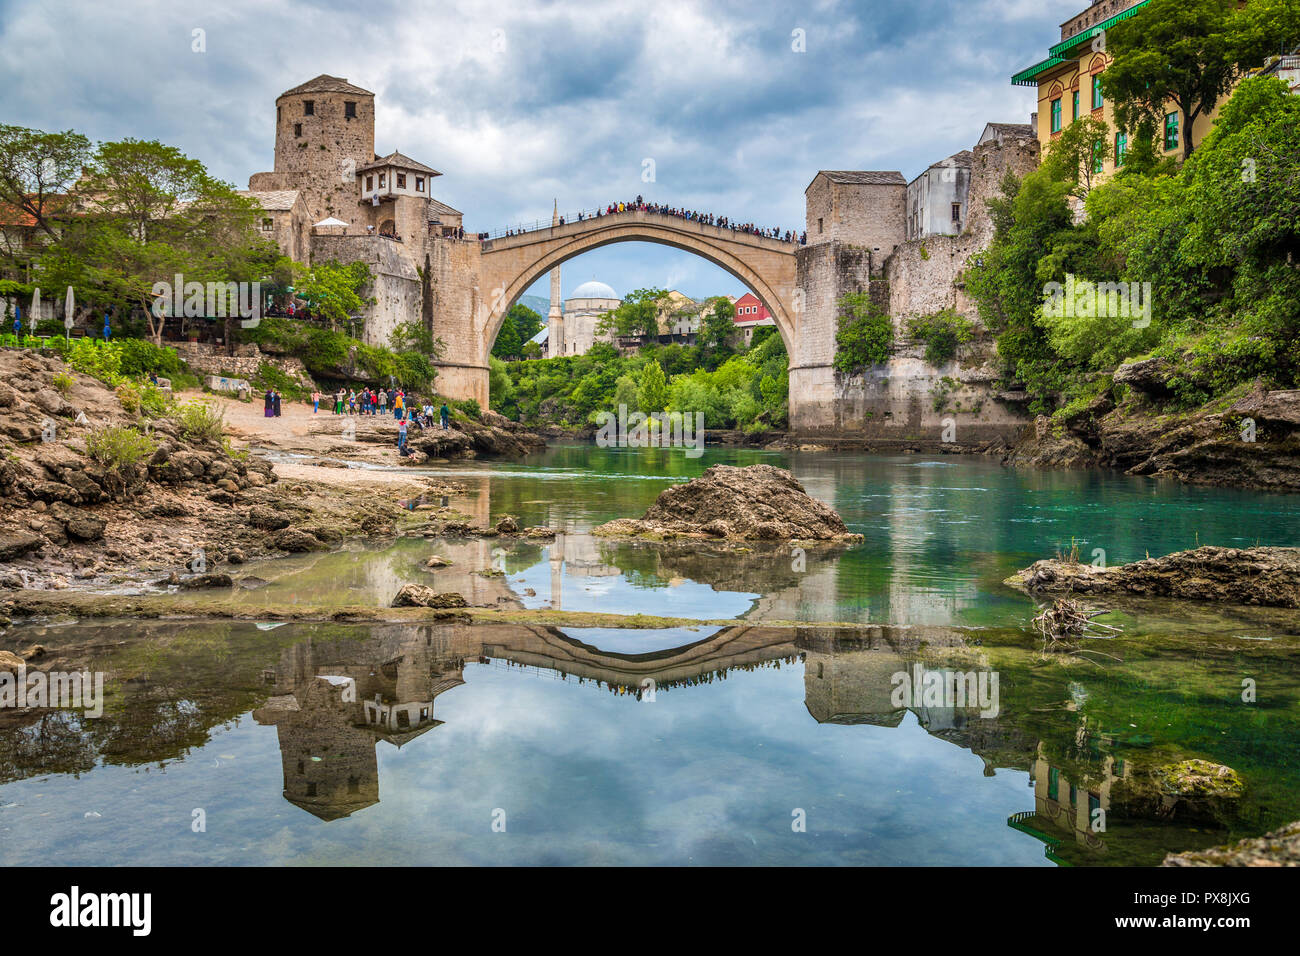 Classic view of the famous Old Bridge of Mostar (Stari Most), a UNESCO World Heritage Site since 2005, on a rainy day with dark clouds in summer Stock Photo